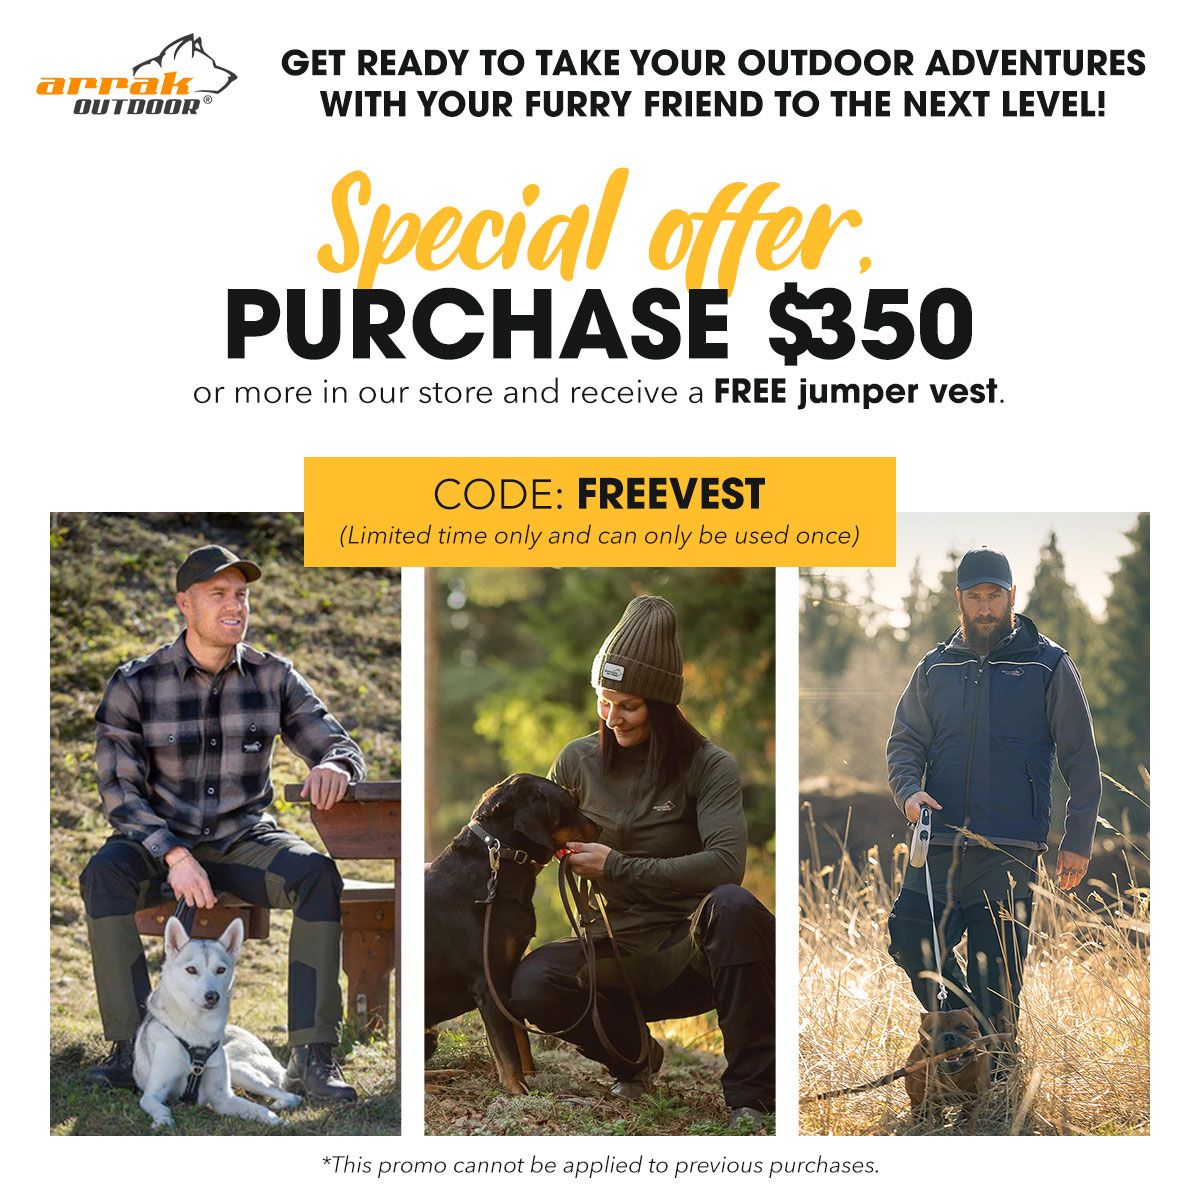 Situation Nervesammenbrud Konsultere Get Ready for your Next Adventure with Arrak Outdoor - Multiple Offers  Inside! - Arrak USA